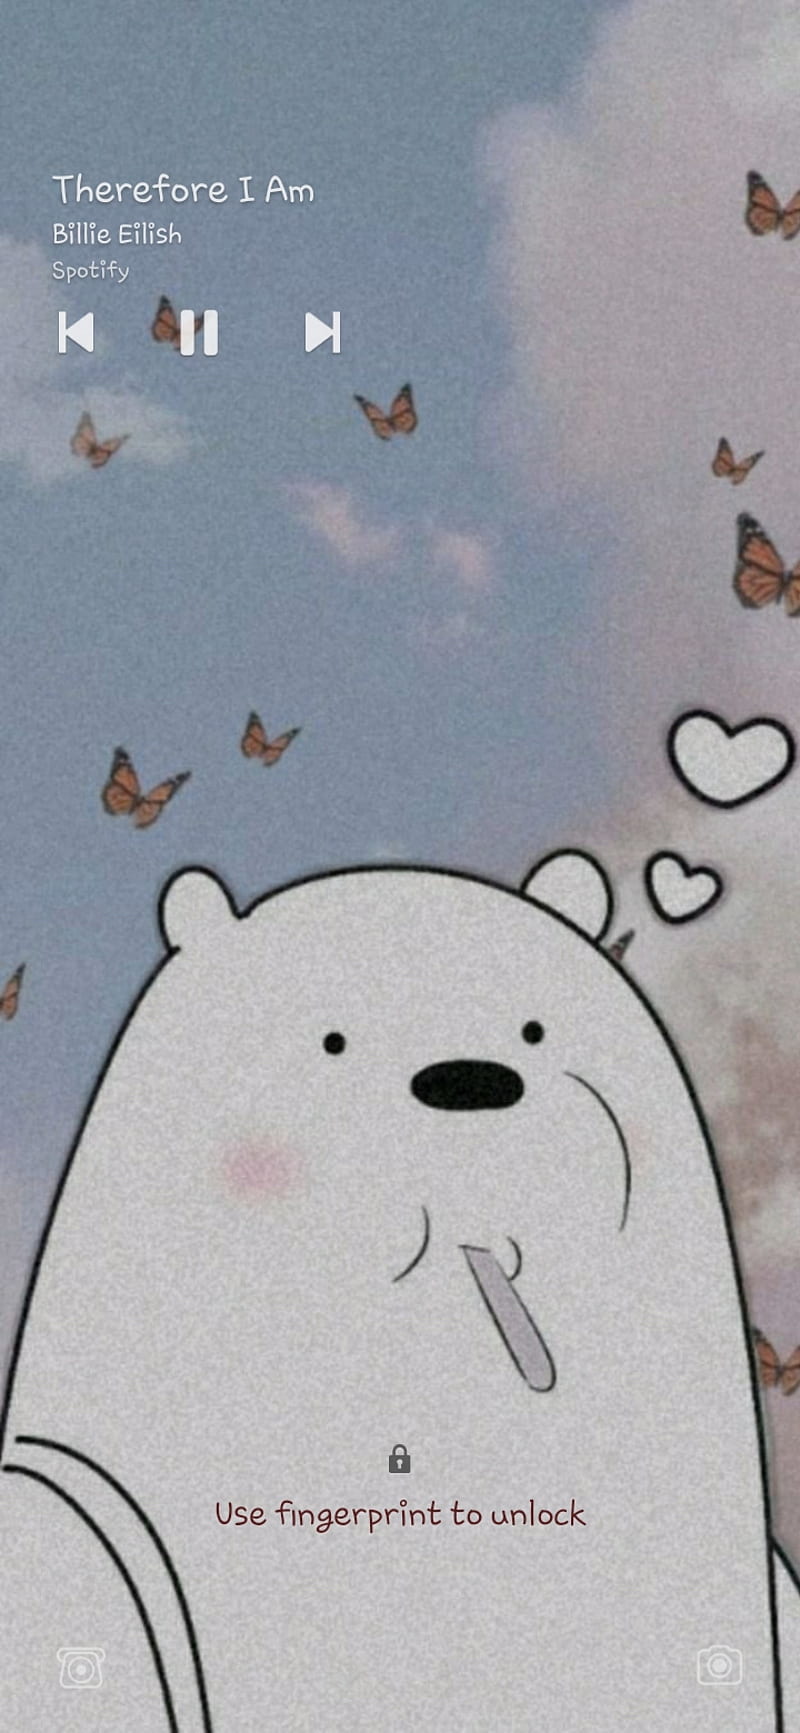 Wallpaper of a white bear with butterflies in the background - We Bare Bears